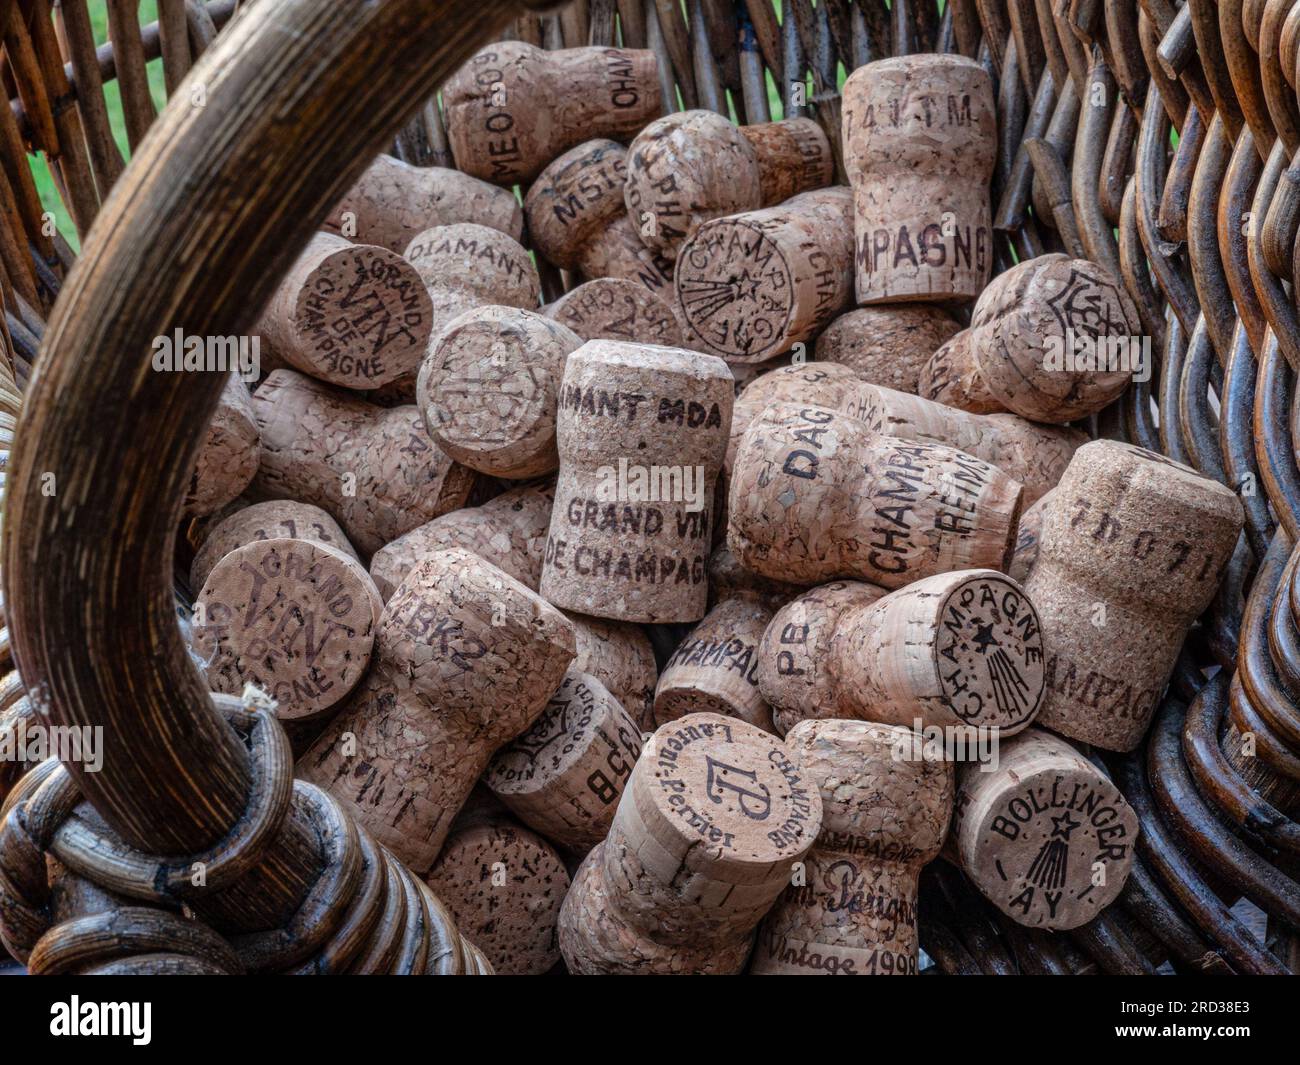 CHAMPAGNE CORKS HARVEST CONCEPT image of French grape pickers harvest basket with selection of various fine luxury champagne corks France Stock Photo